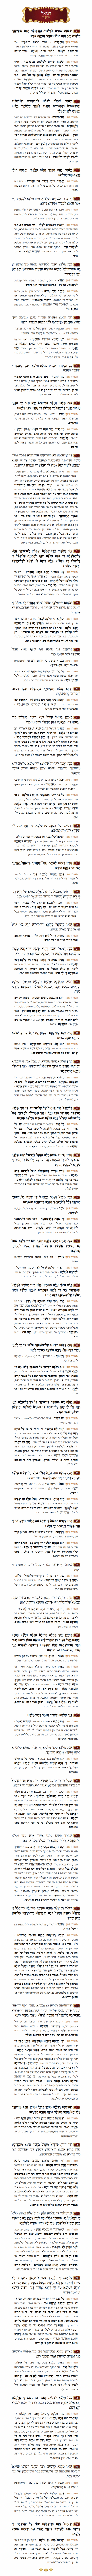 Sefer Daniel Chapter 2 with commentary